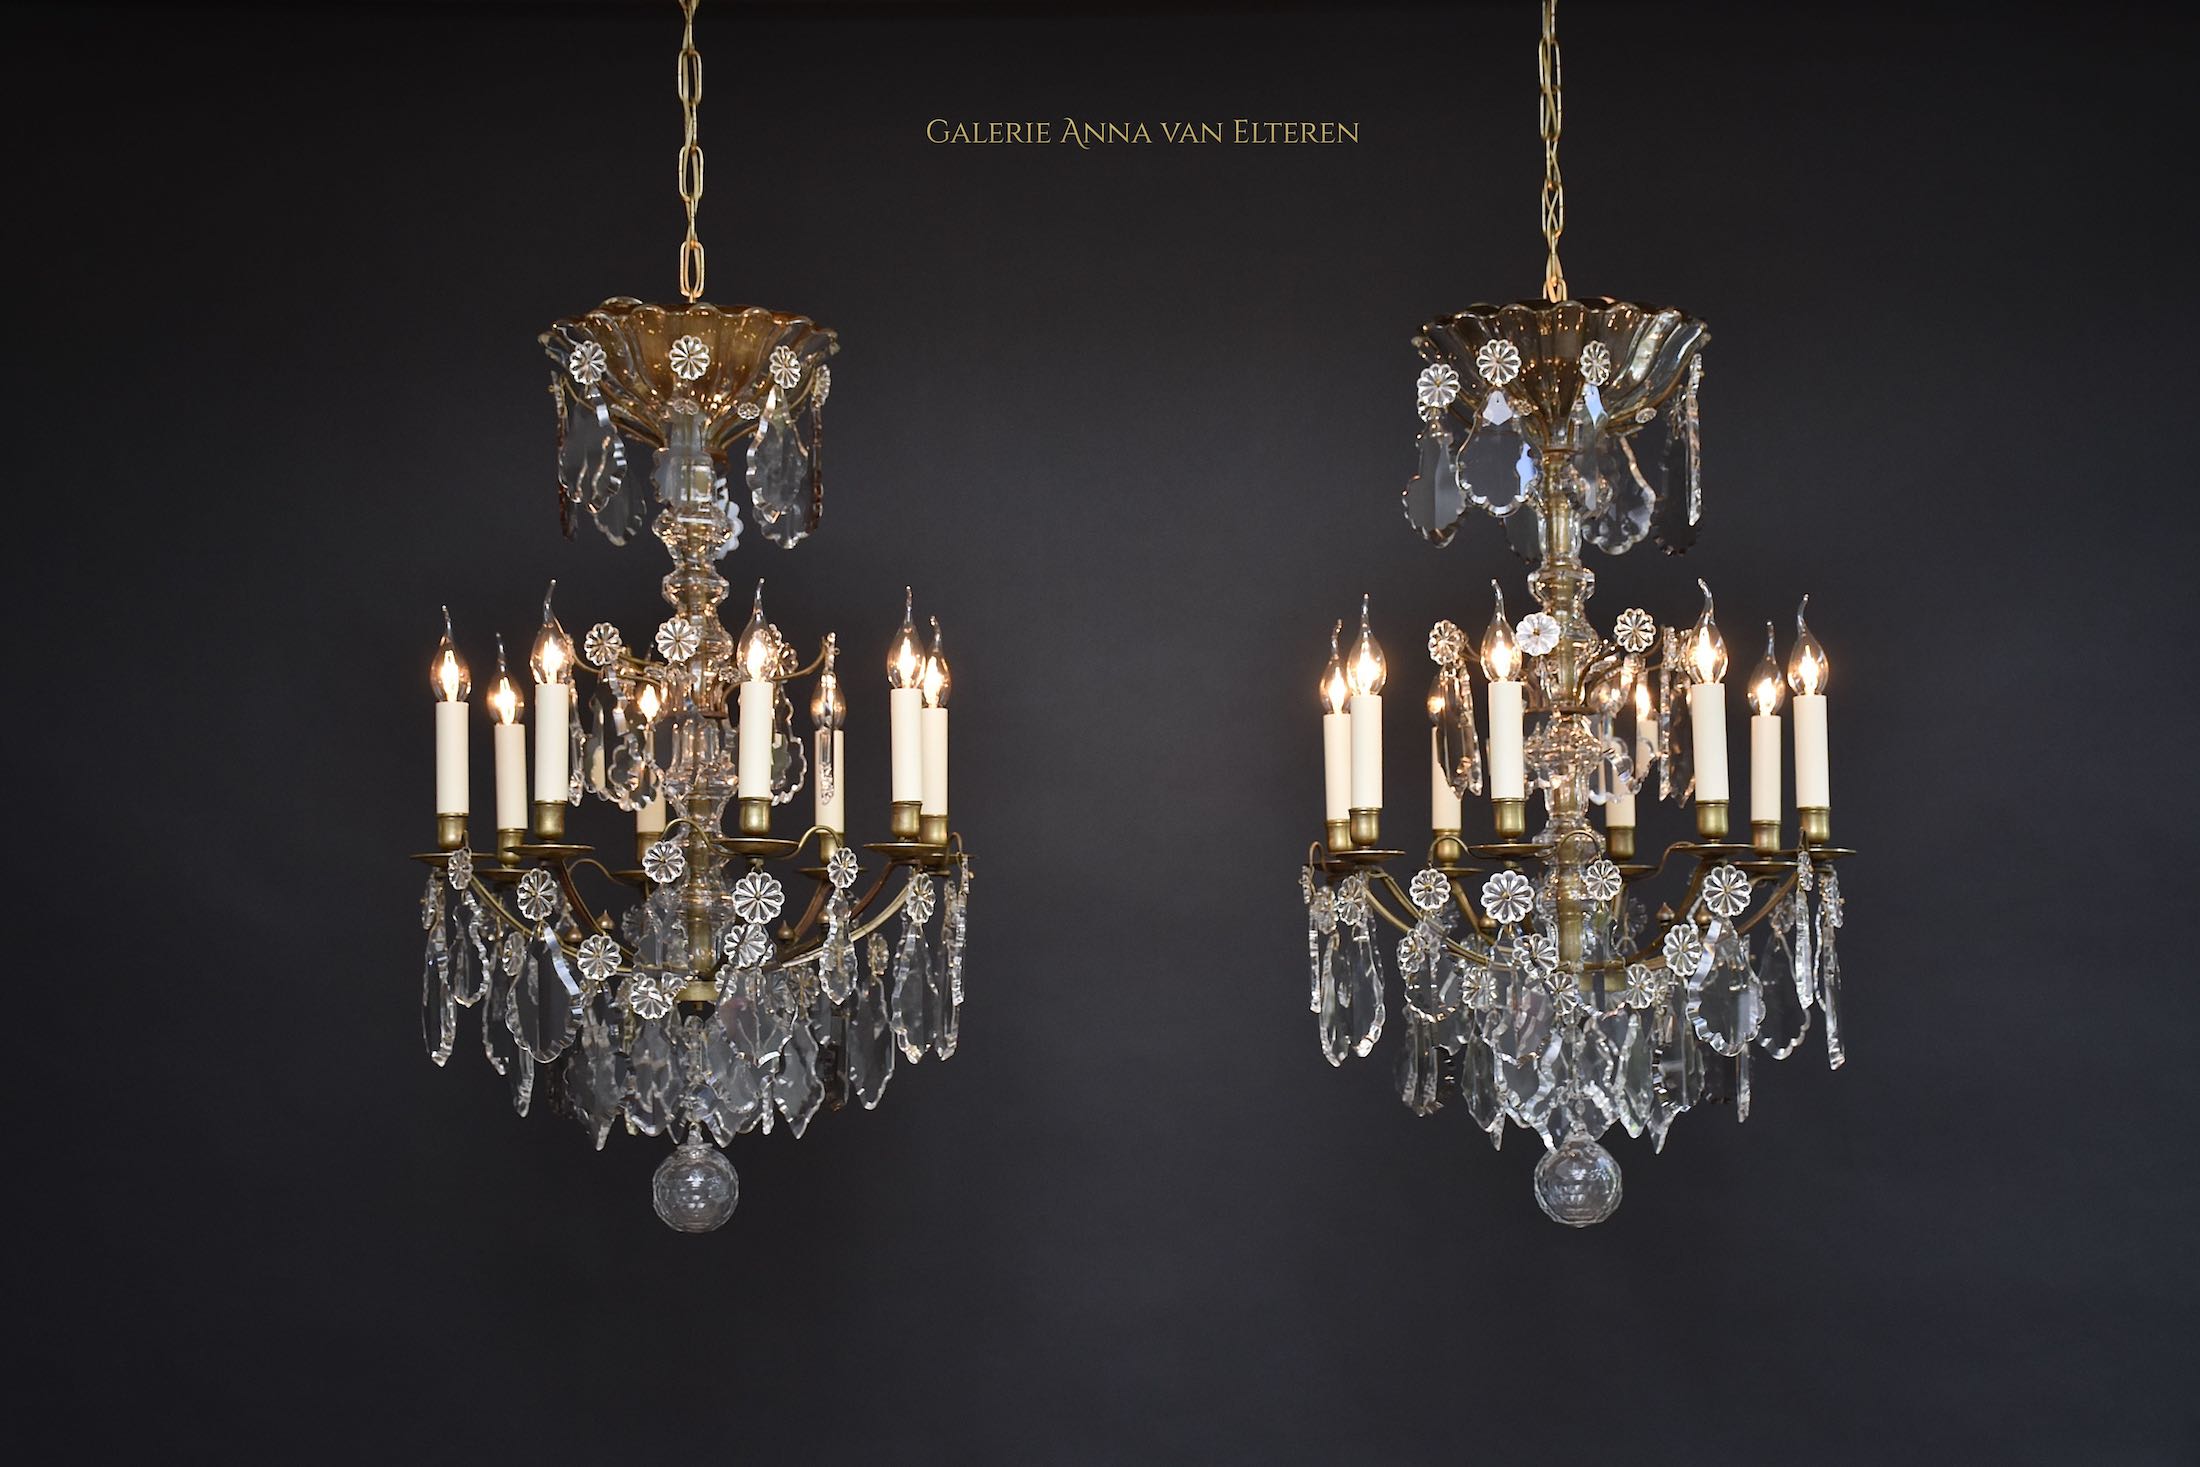 A pair of antique French chandeliers